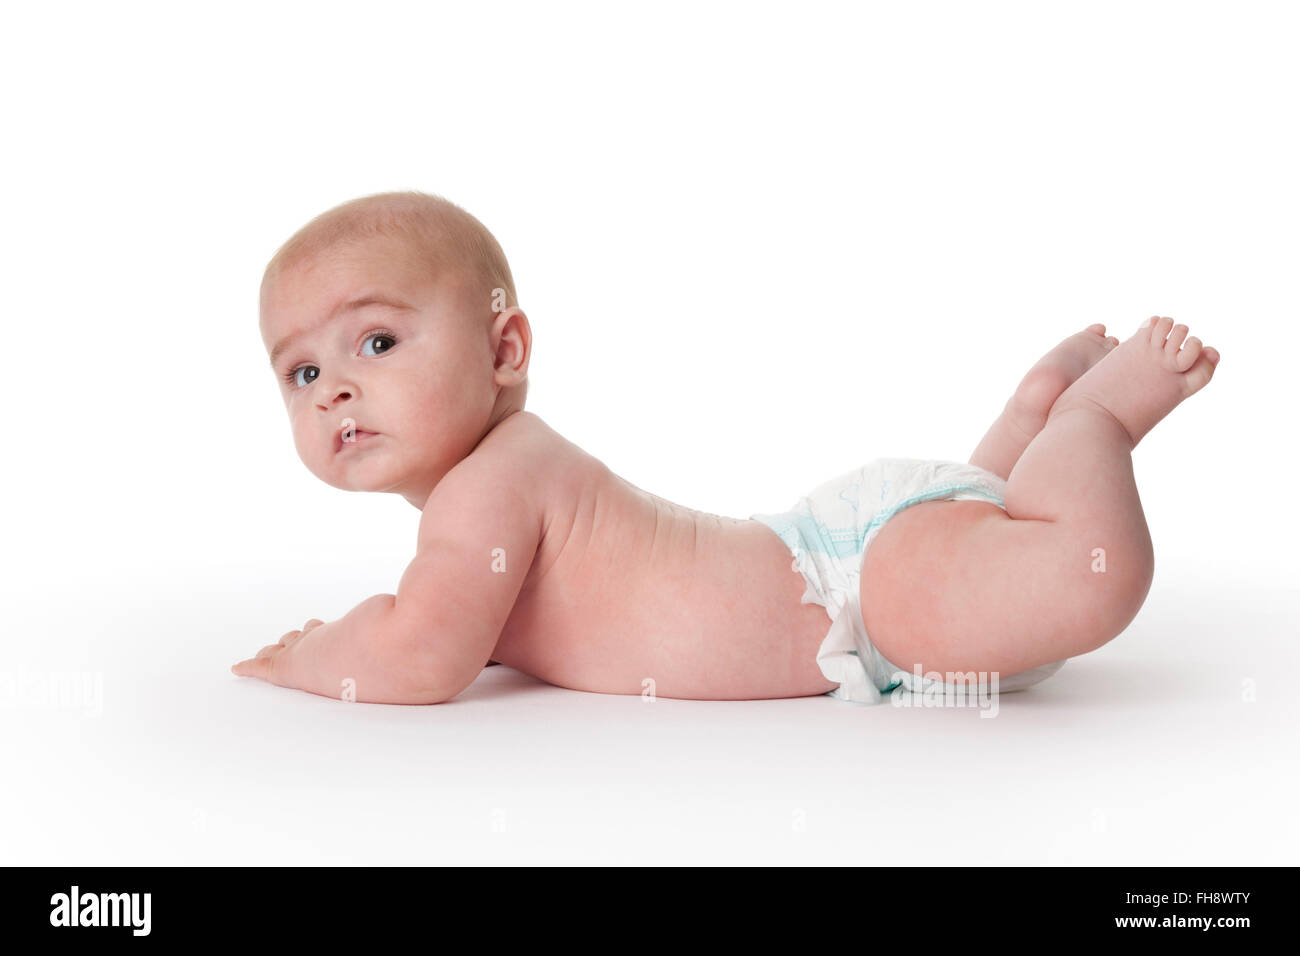 Baby boy lying on his belly full lenght on white background Stock Photo